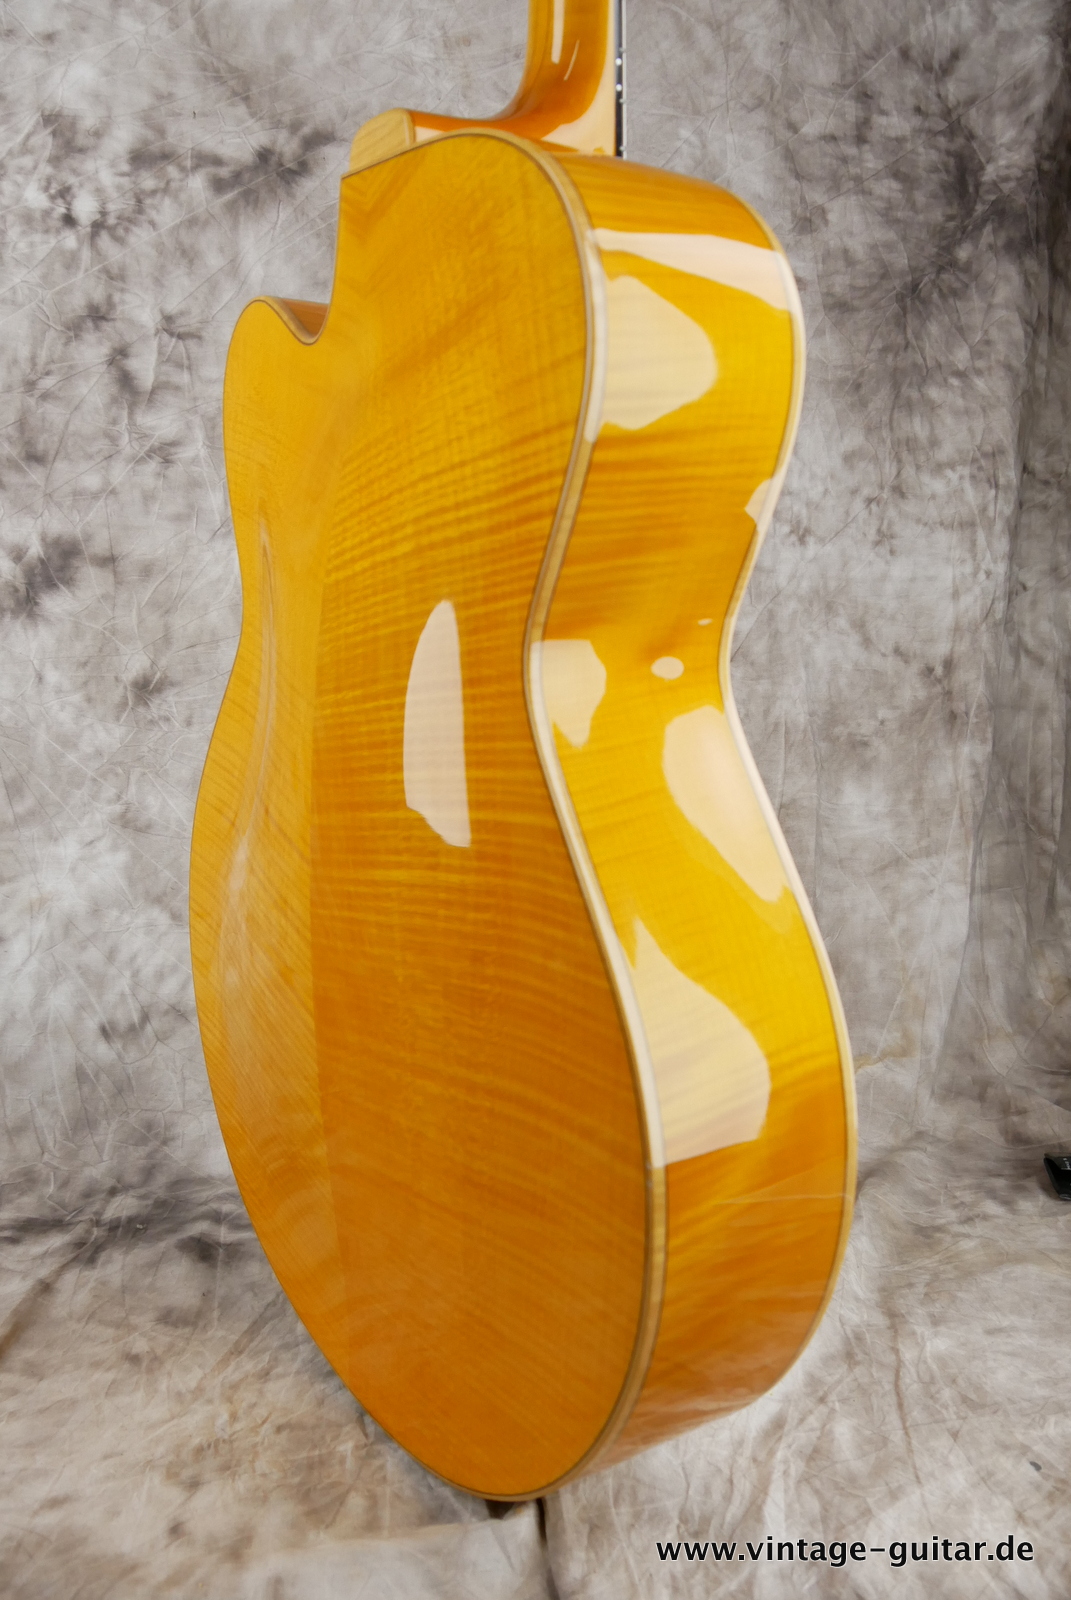 Launhardt_Fs3_german_guitar_archtop_all_solid-008.JPG